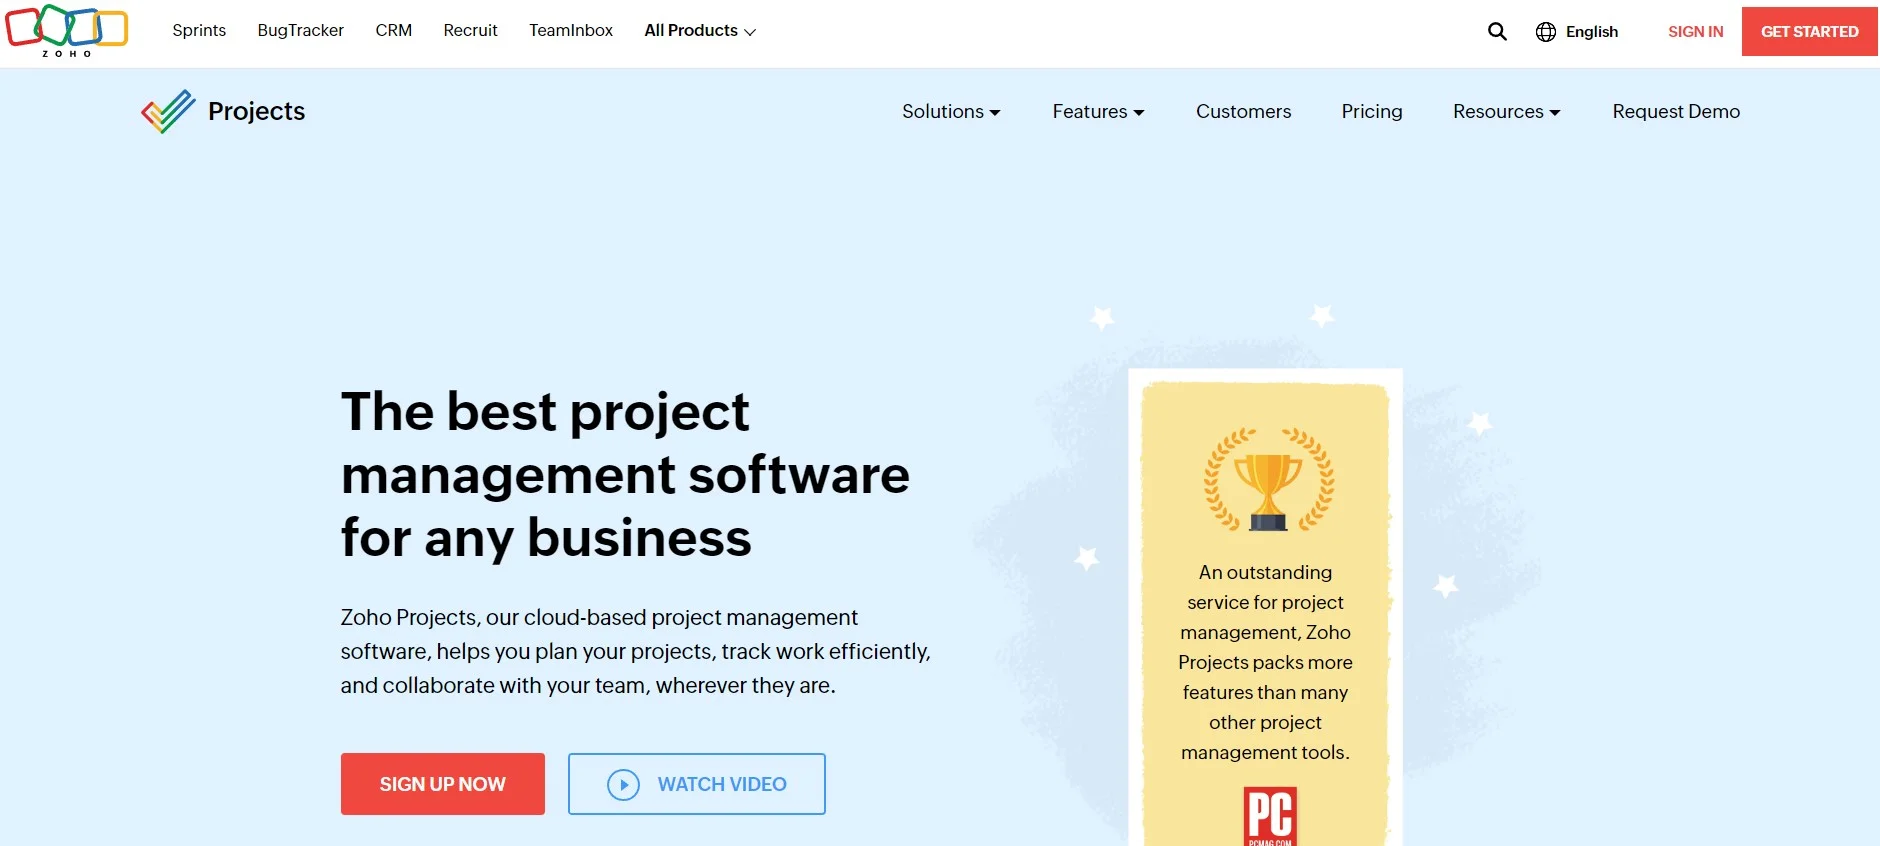 Zoho projects project management software